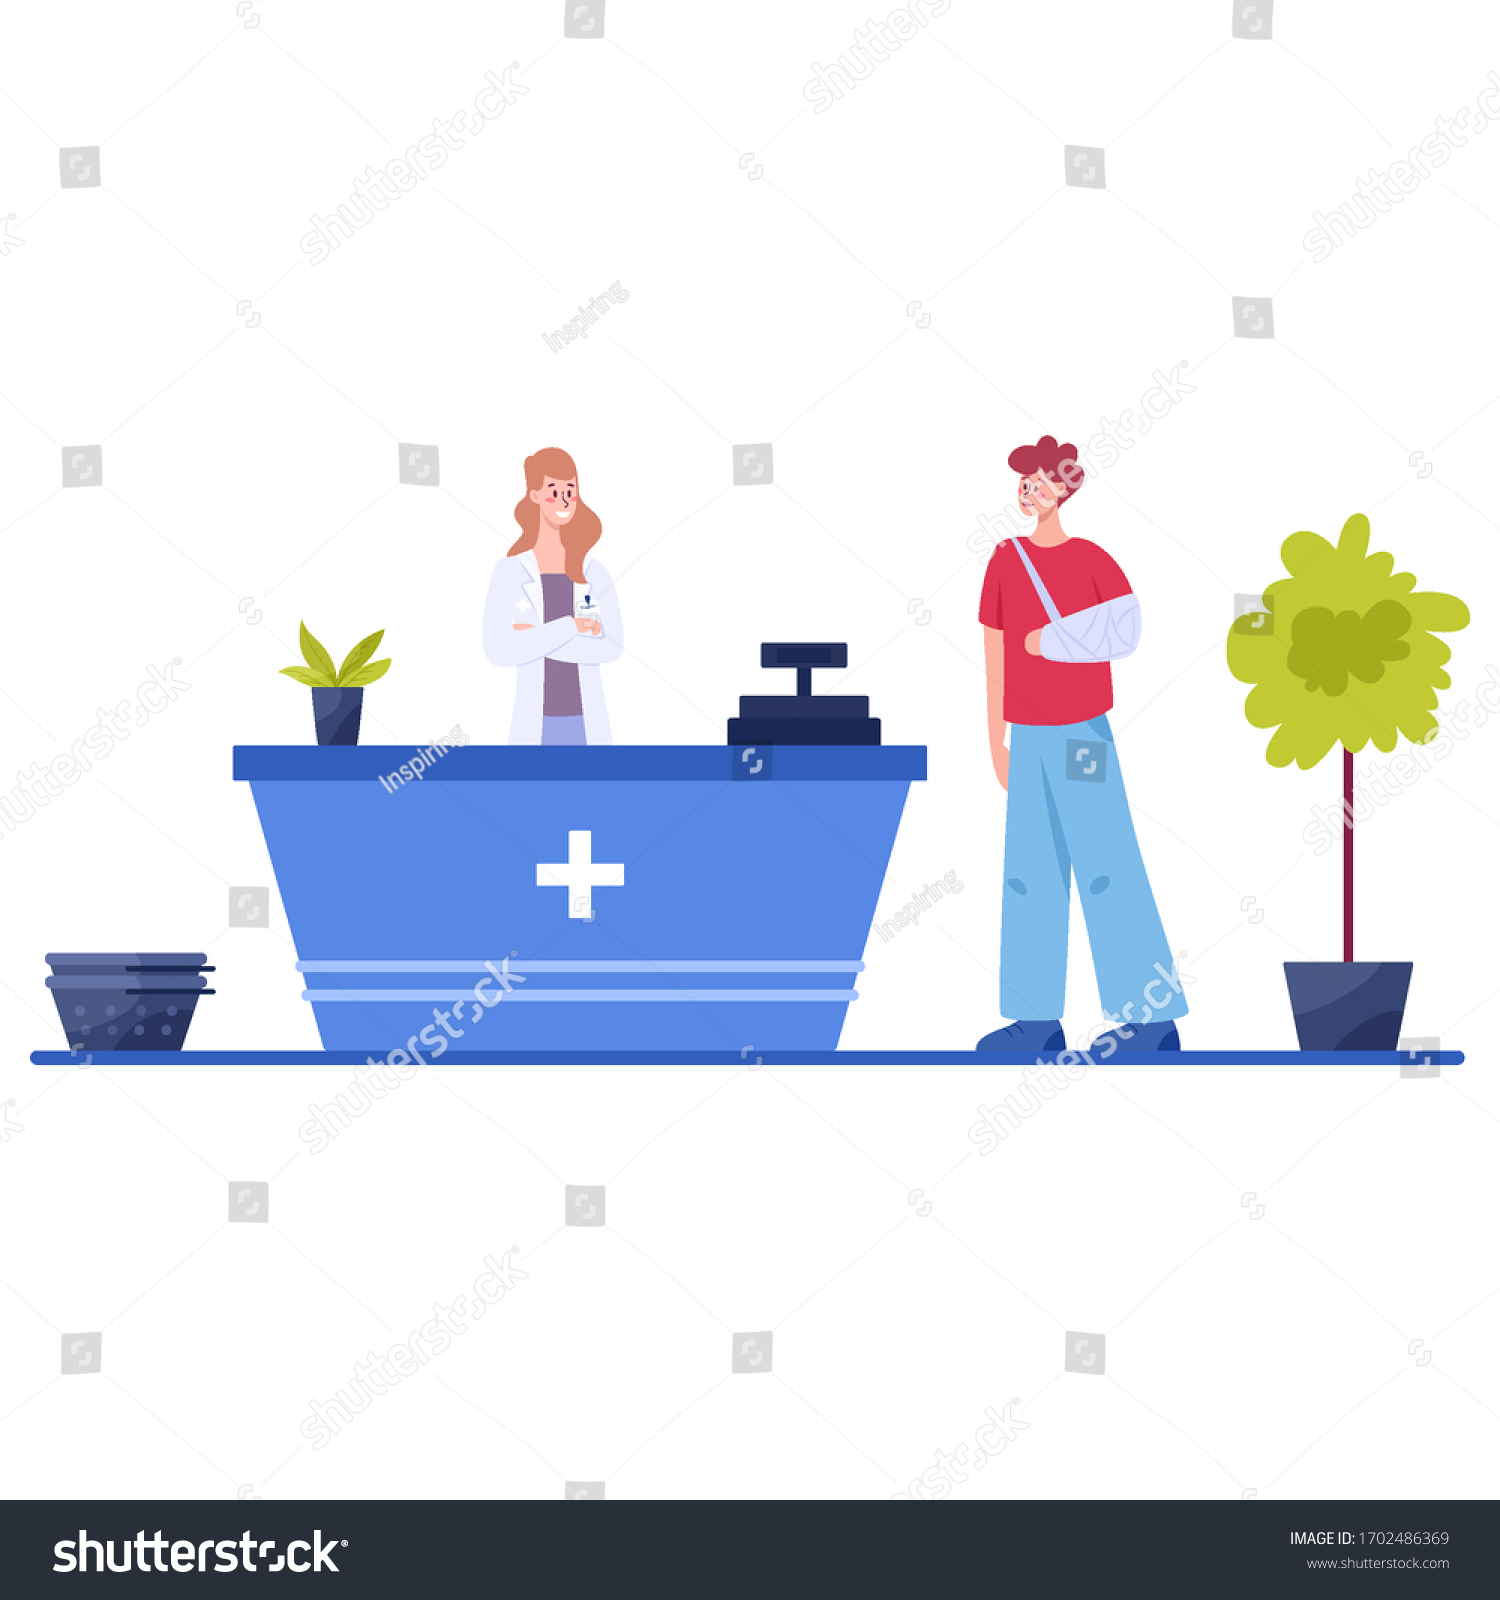 Modern pharmacy interior with visitor. Client order and buy medicaments and drugs. Pharmacist standing at the counter in the uniform. Healthcare and medical treatment concept. Vector illustration #1702486369